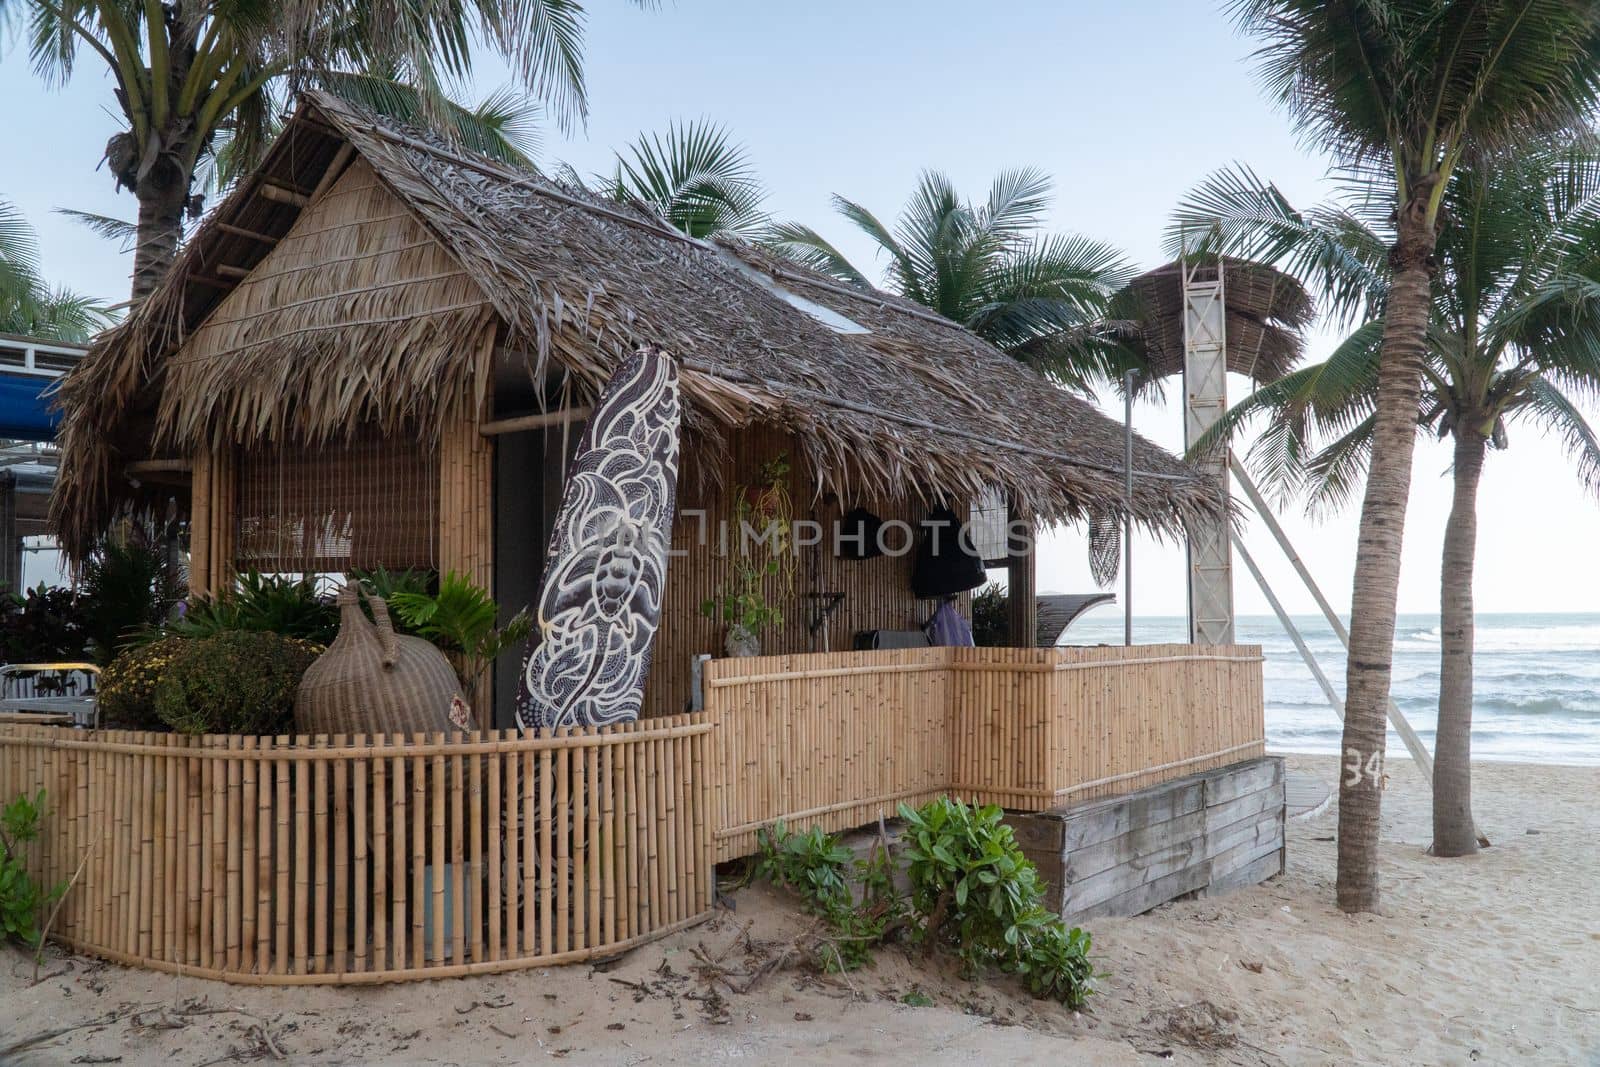 Beach bungalow made of palm leaves on the beach with a surfboard by voktybre